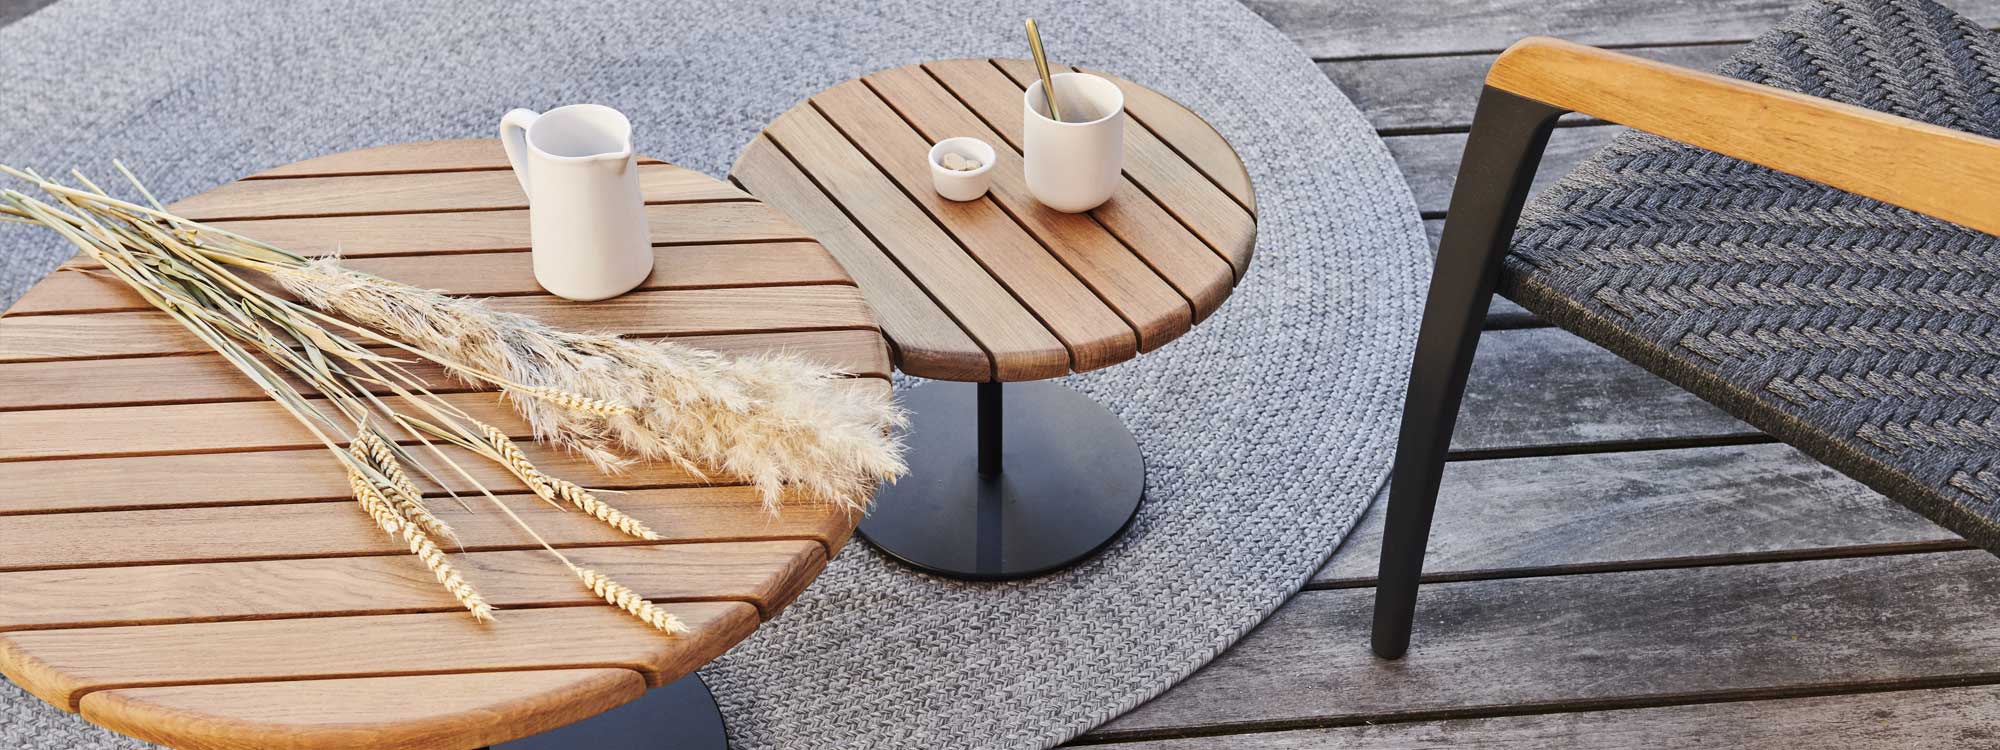 Royal Botania Butler tables with planked teak tops and anthracite steel bases on circular outdoor rug